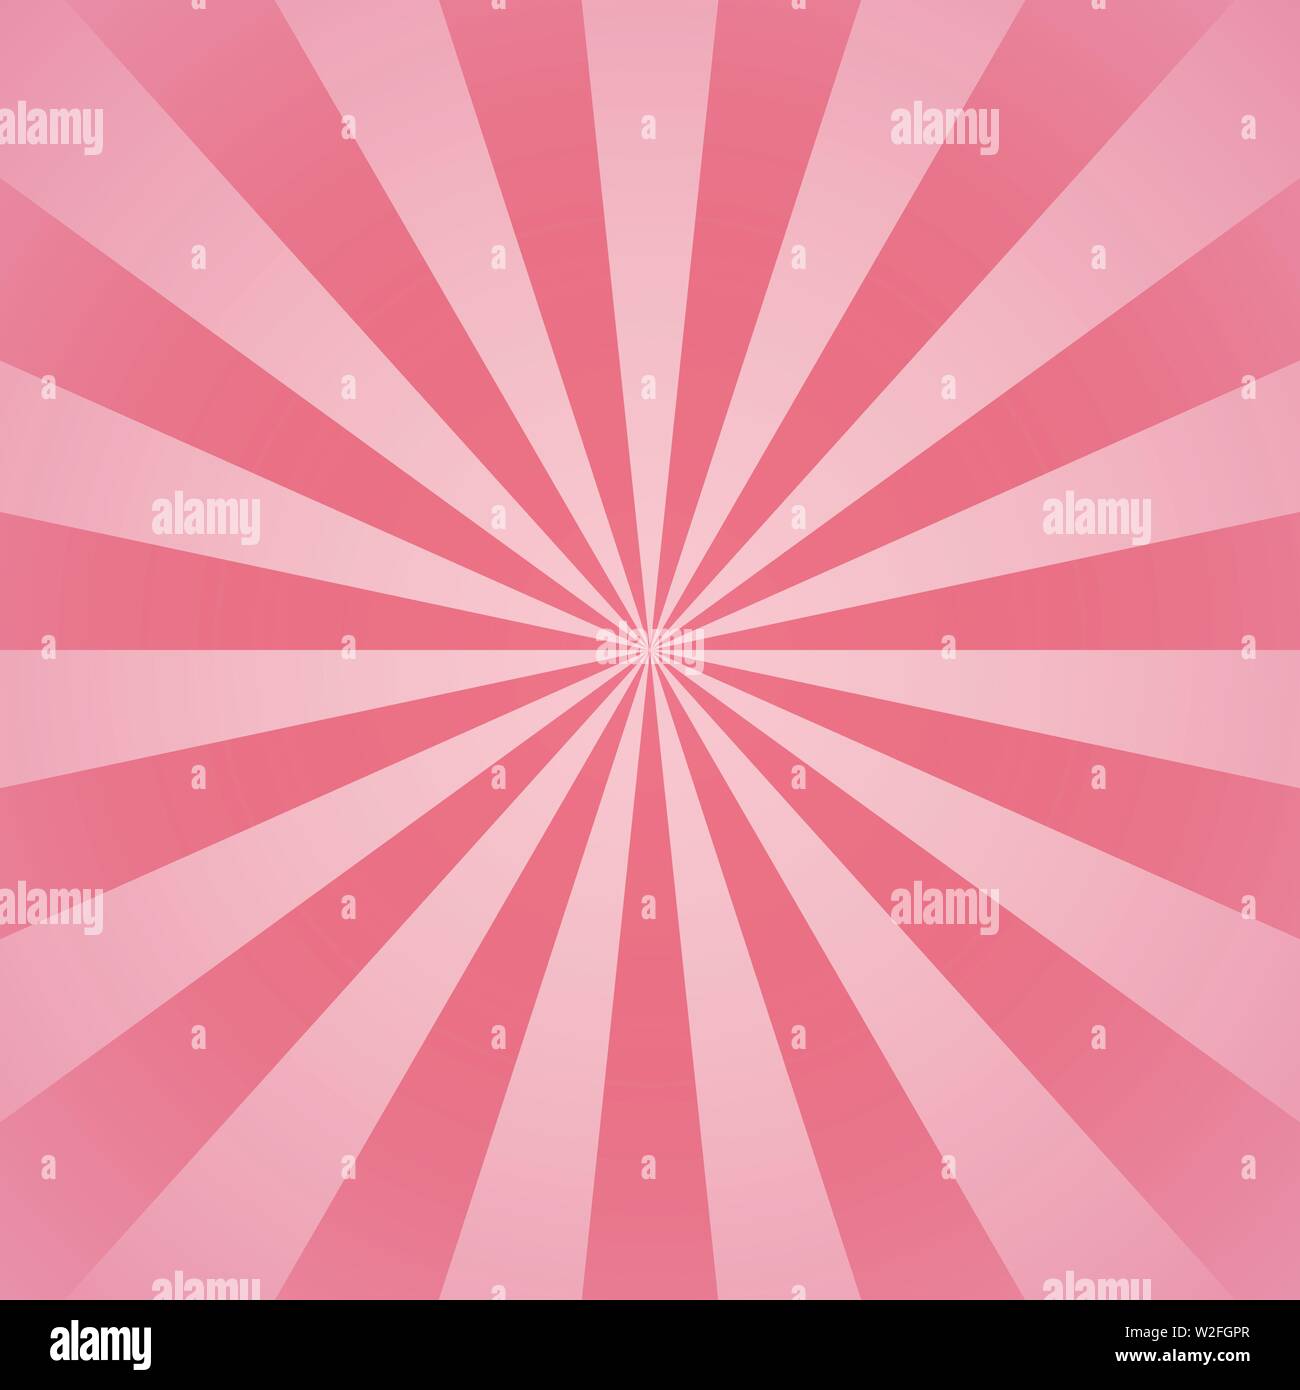 Pink beams and rays abstract girly vector illustration radial lines background Stock Vector